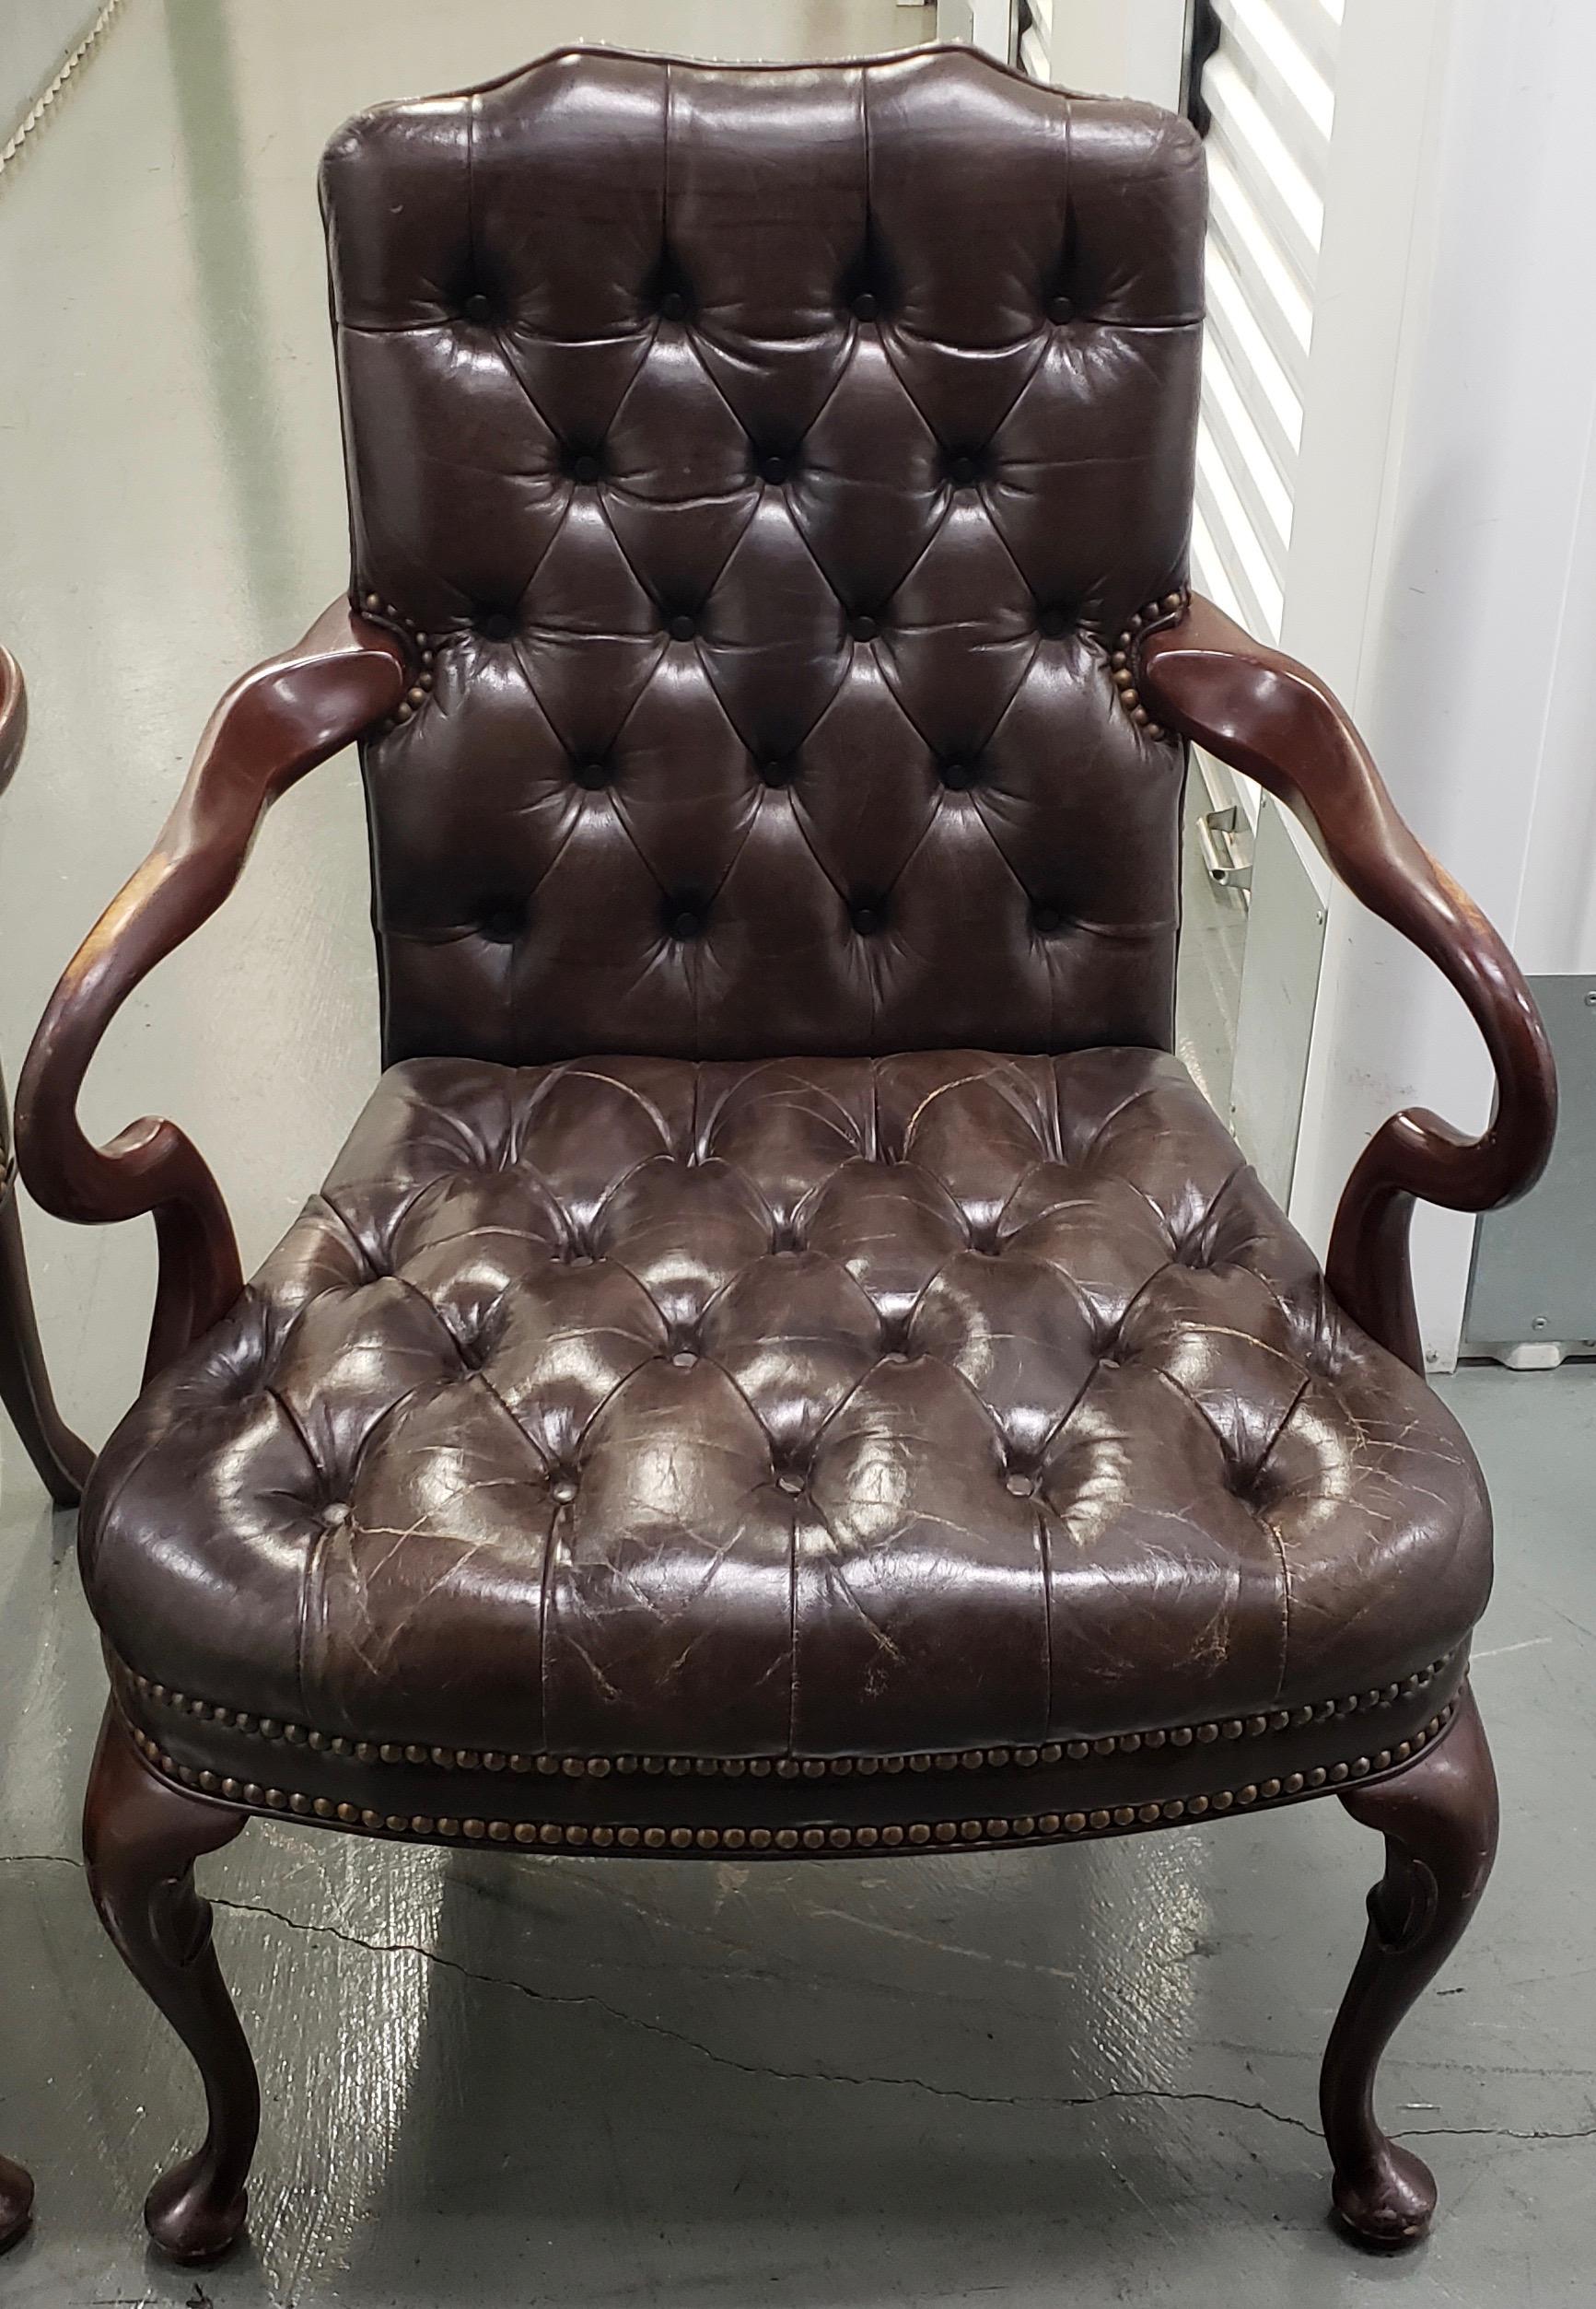 Pair of Sumptuous chocolate leather button down side chairs circa 1970s

Beautiful pair of rich mahogany and chocolate brown leather arm chairs. The supple leather is attached to the frame of the chair with brass tacks. The frames are made from